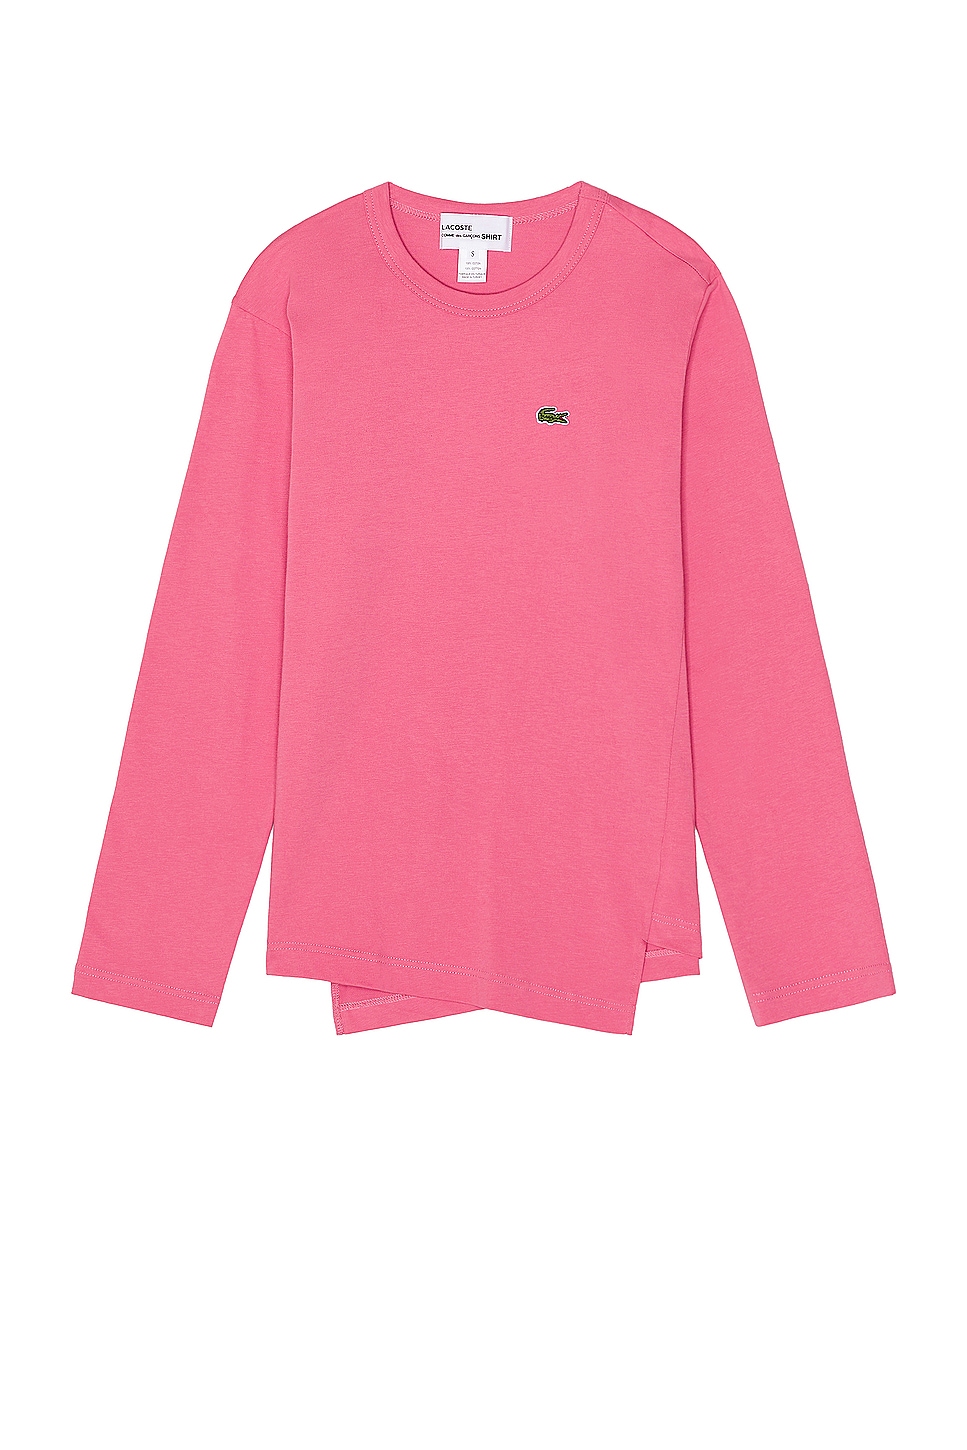 Image 1 of COMME des GARCONS SHIRT X Lacoste Tee in Pink